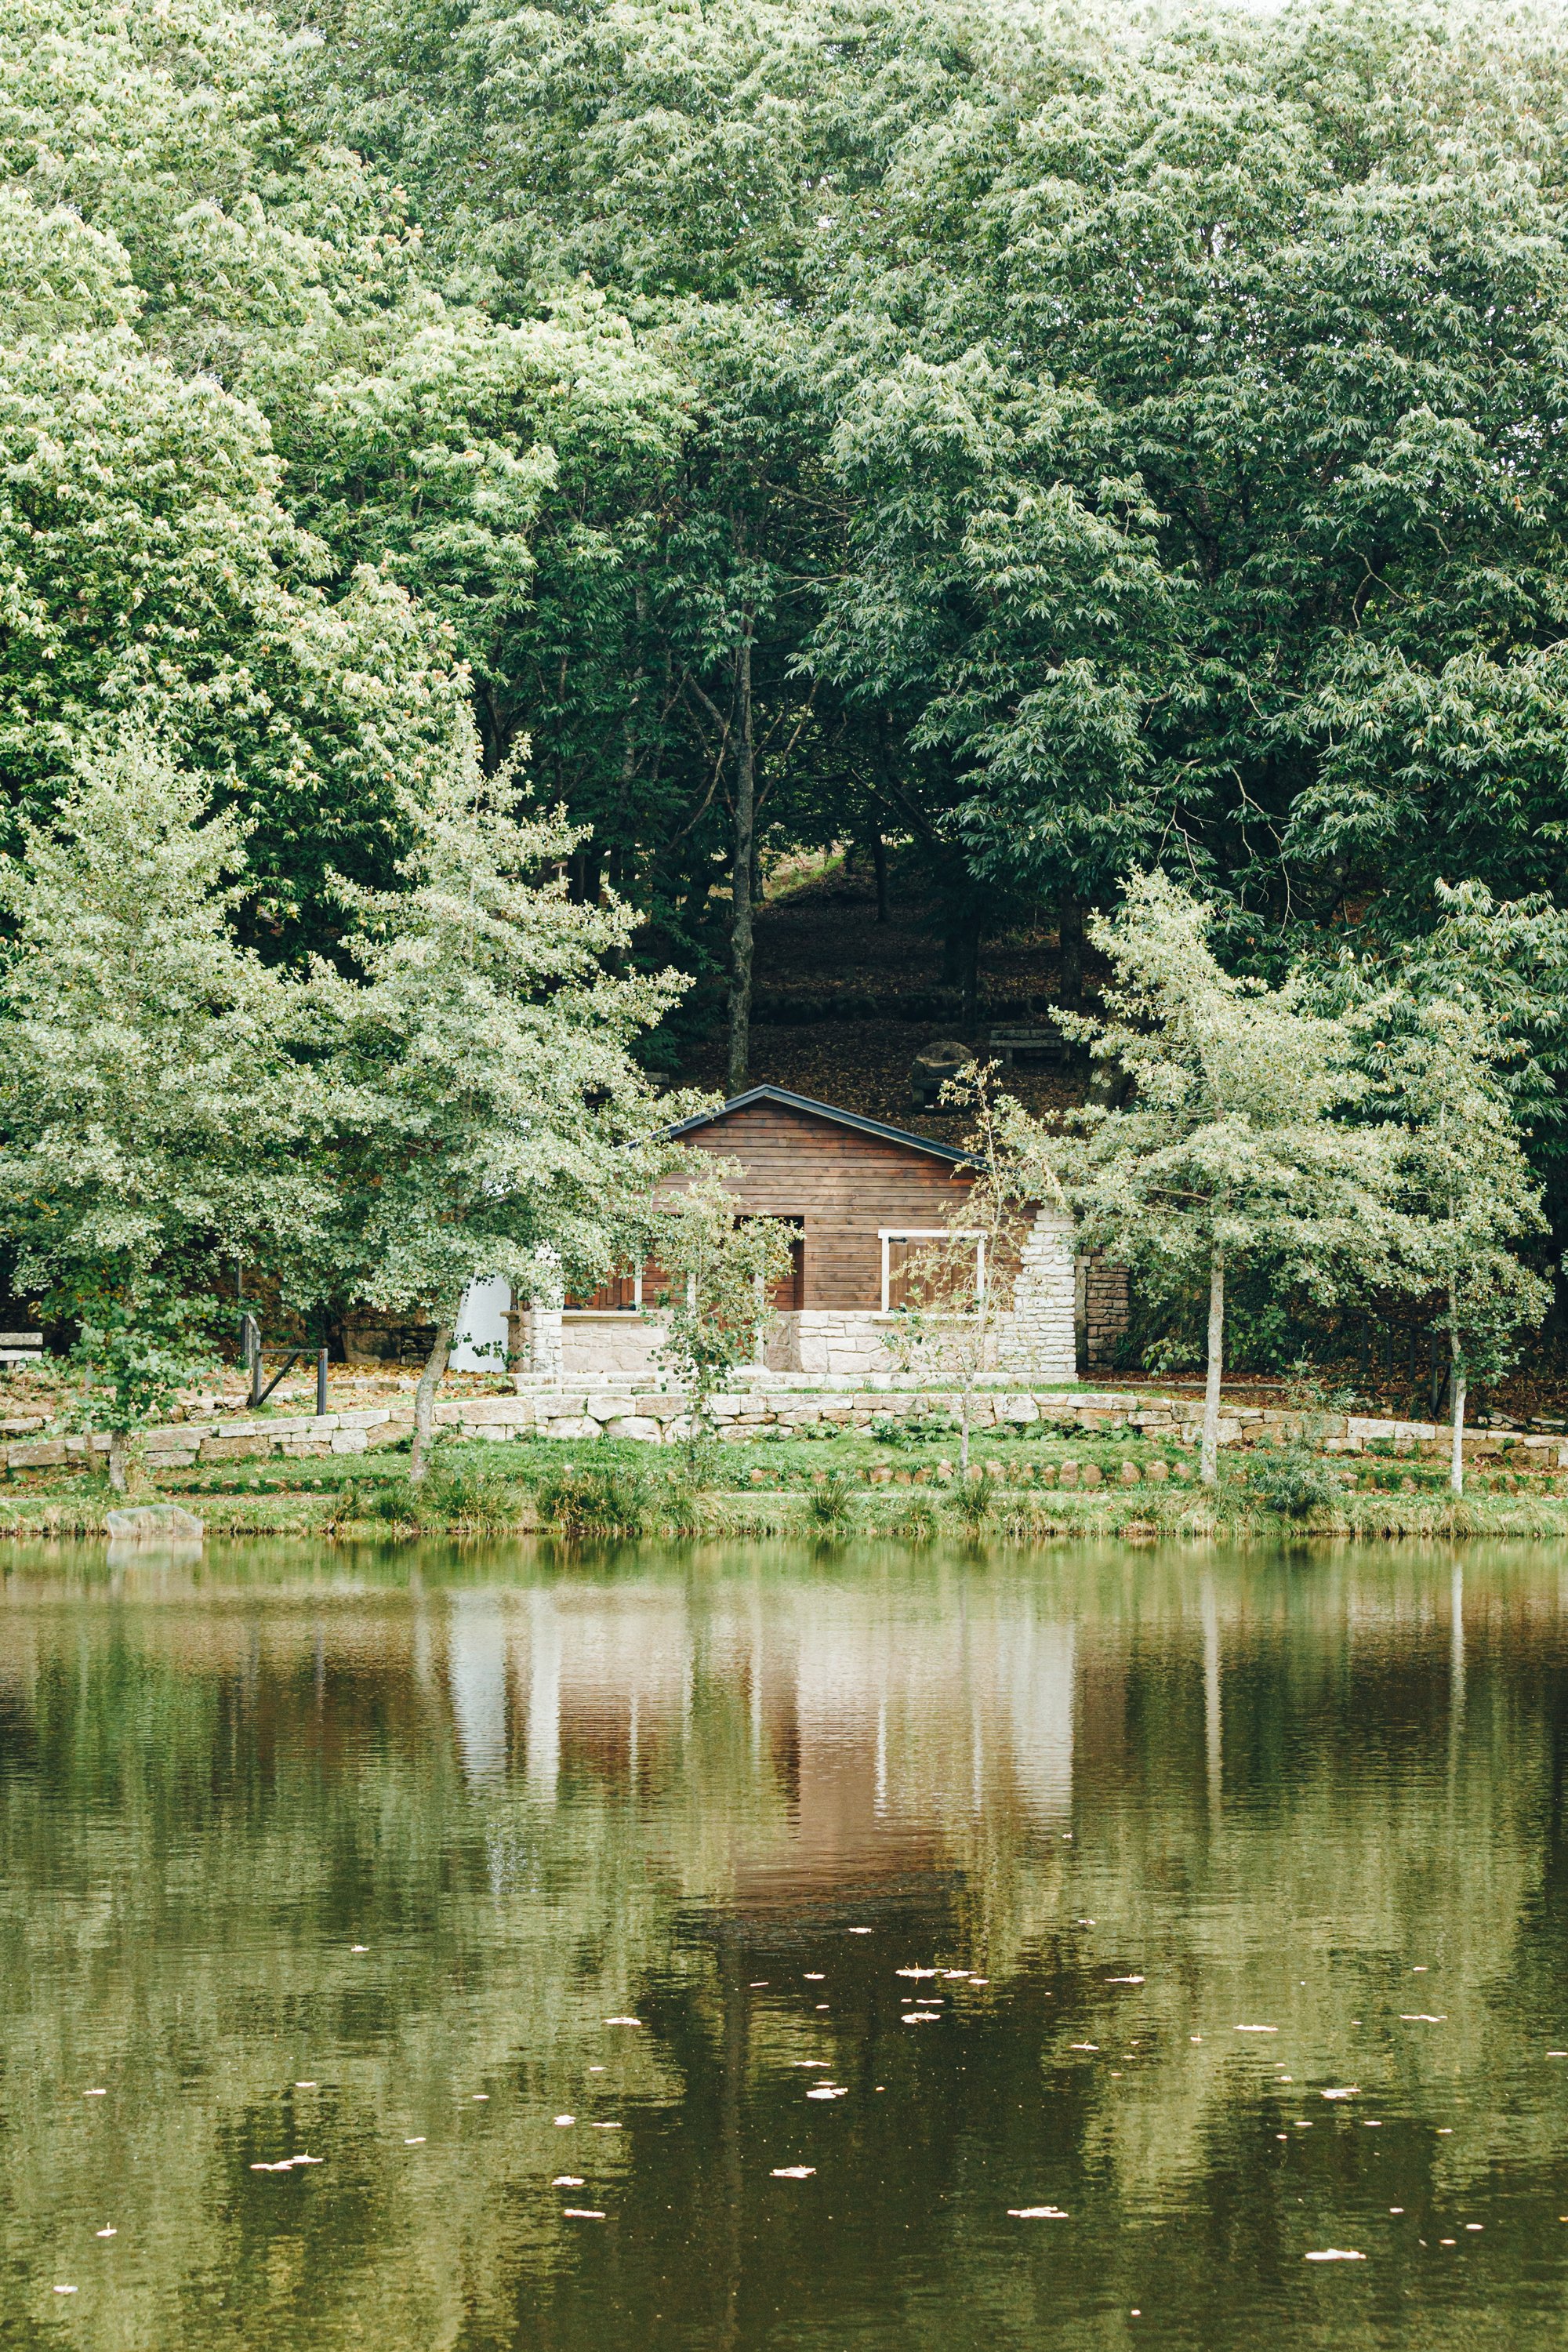 waterfront wood cabin surrounded by lush forest 滨水木屋被茂密的森林所包围